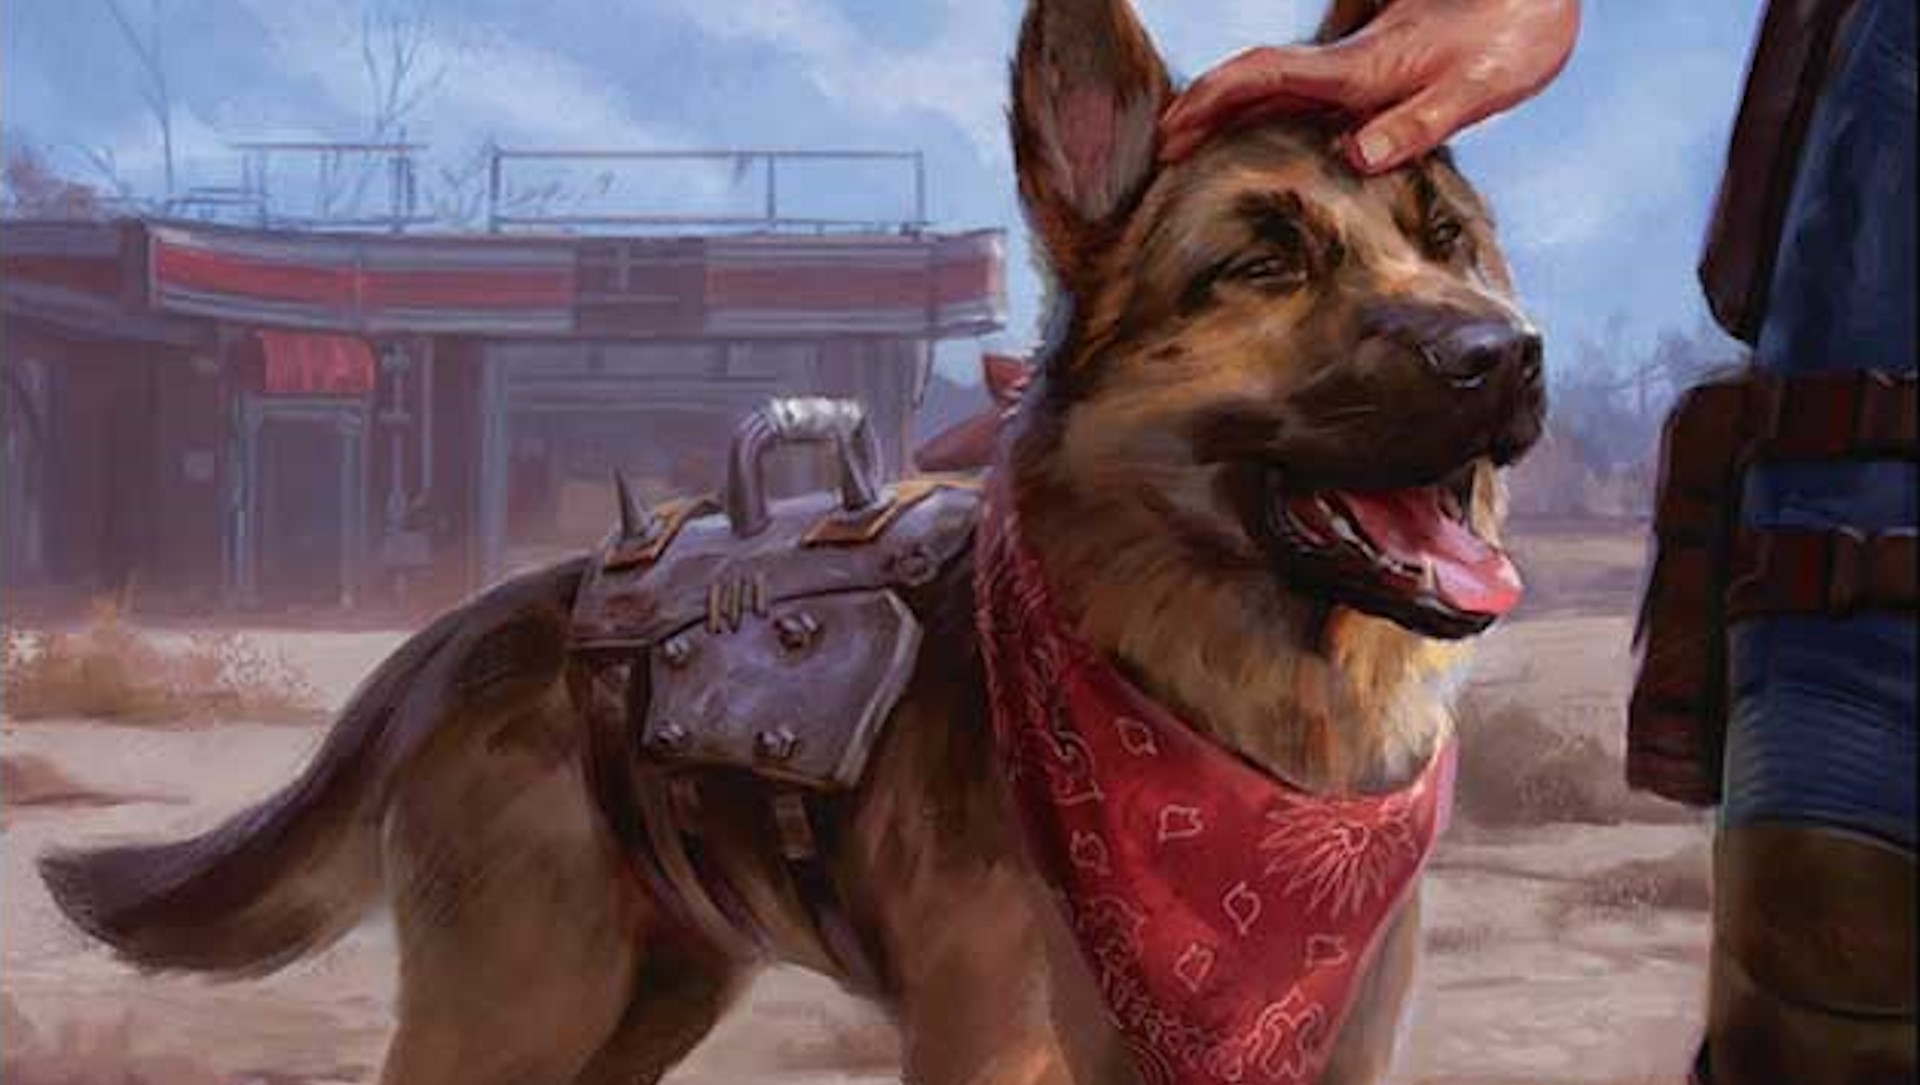  Dogmeat is coming to Magic: The Gathering in Fallout-themed Commander decks launching next year 